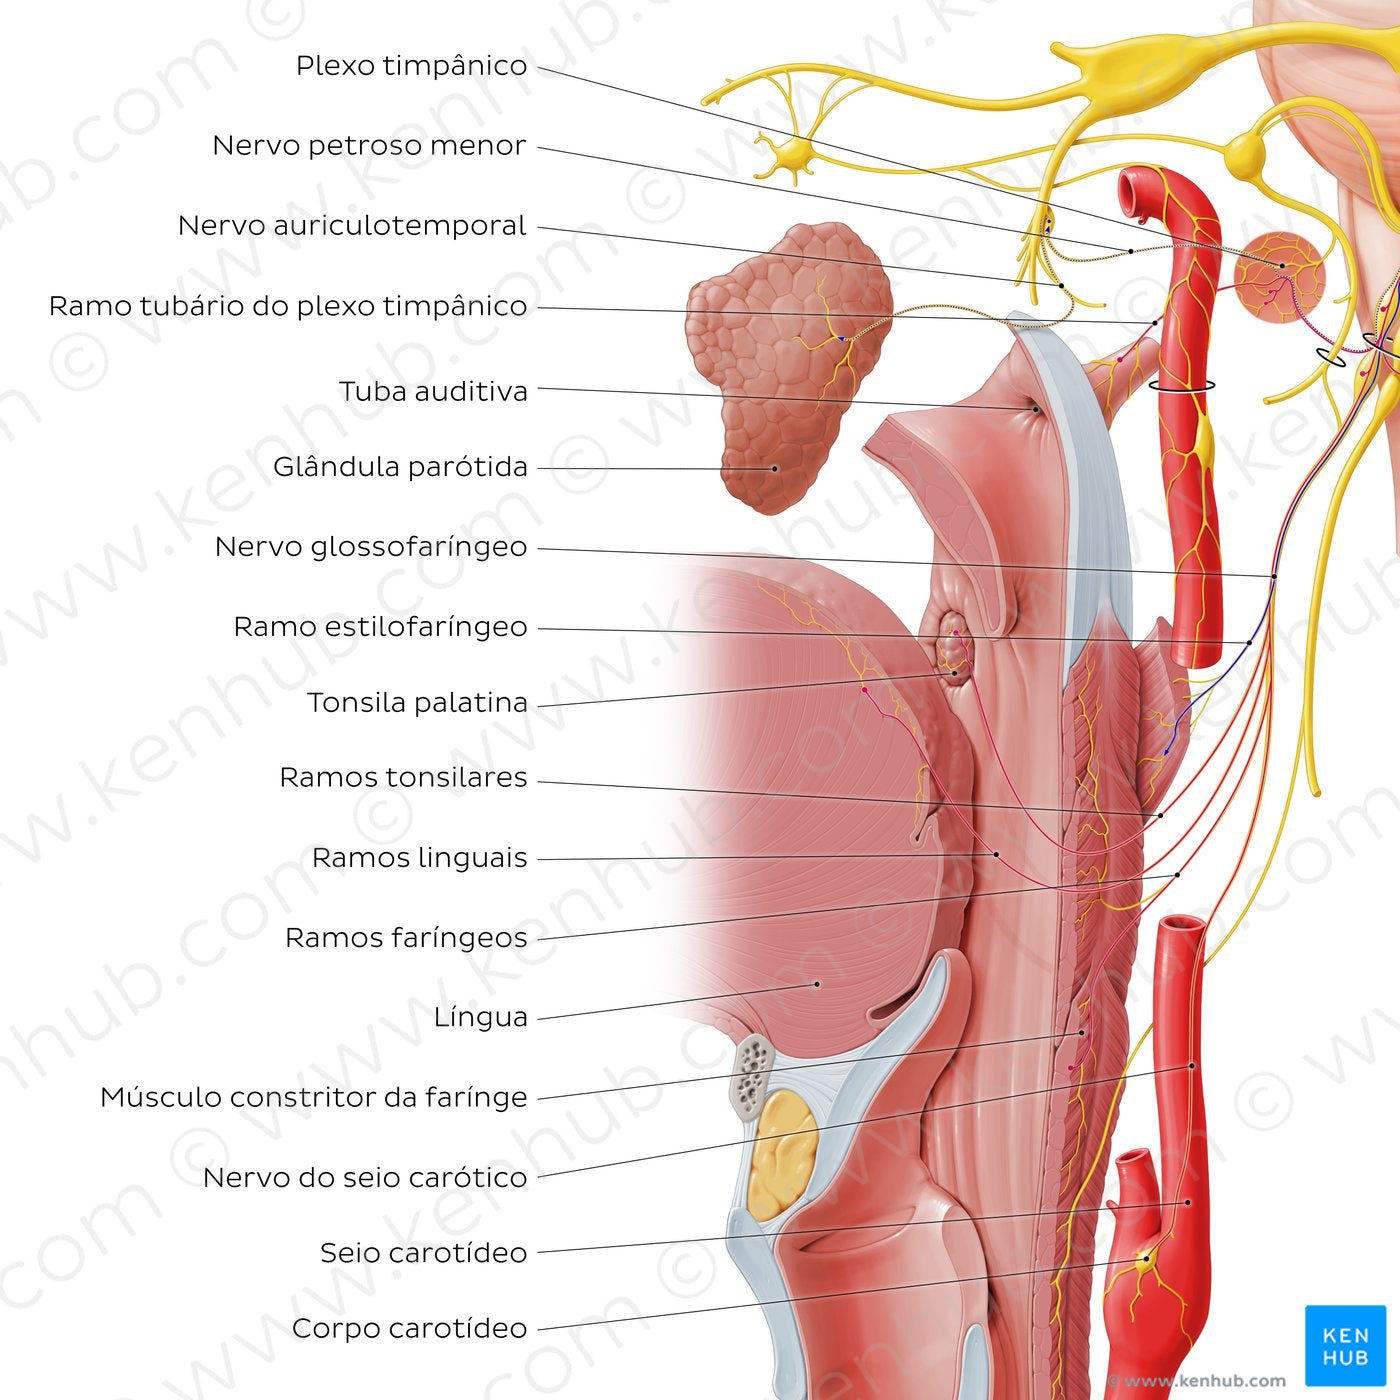 Glossopharyngeal nerve (distal branches) (Portuguese)